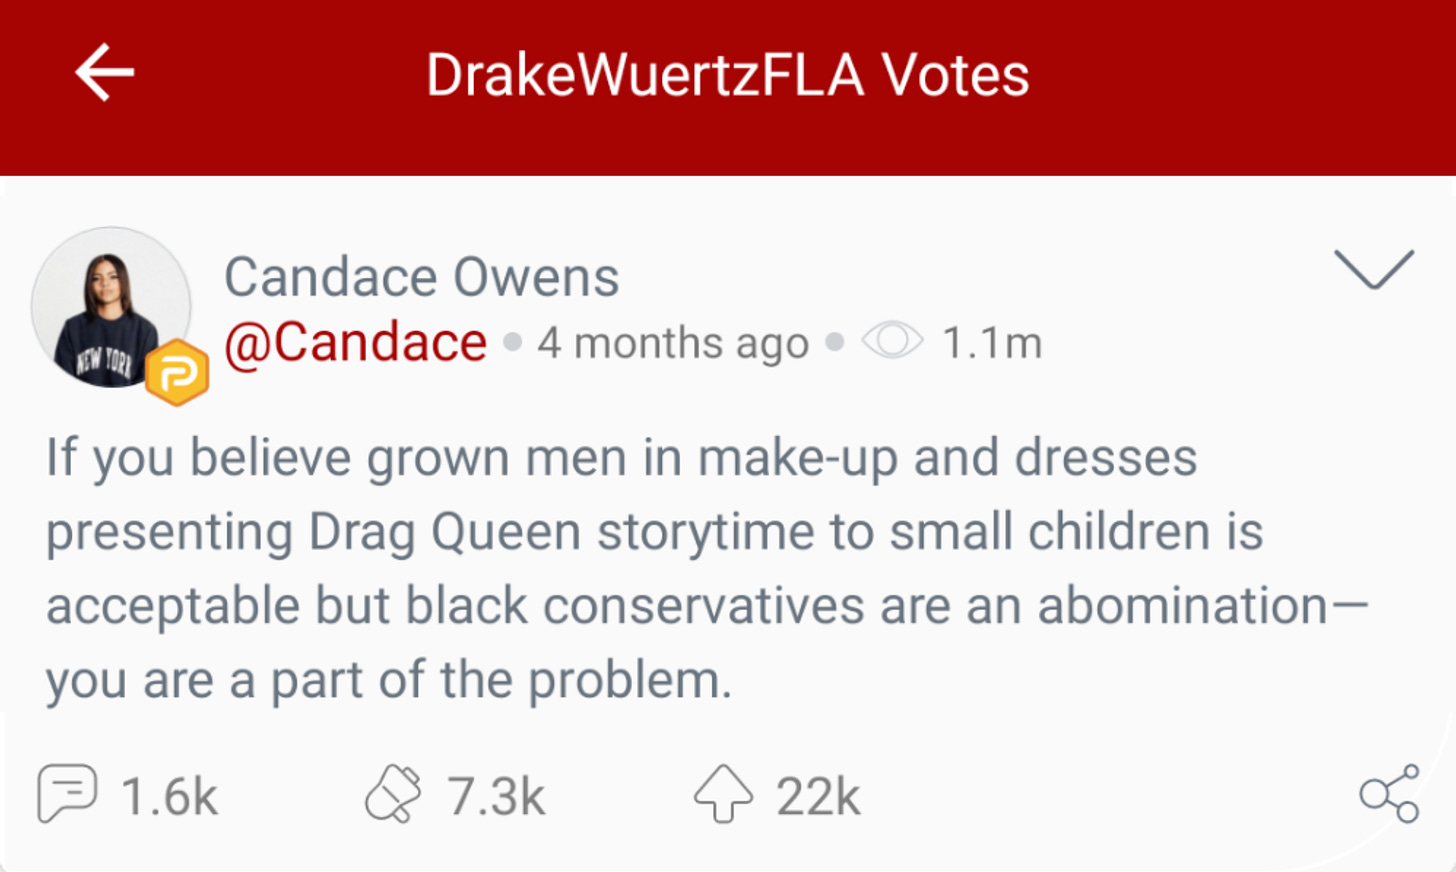 @DrakeWuertzFLA “votes” a Candace Owens post about “Drag Queet Story Time” on Parler. (Image: Parler screenshot.)